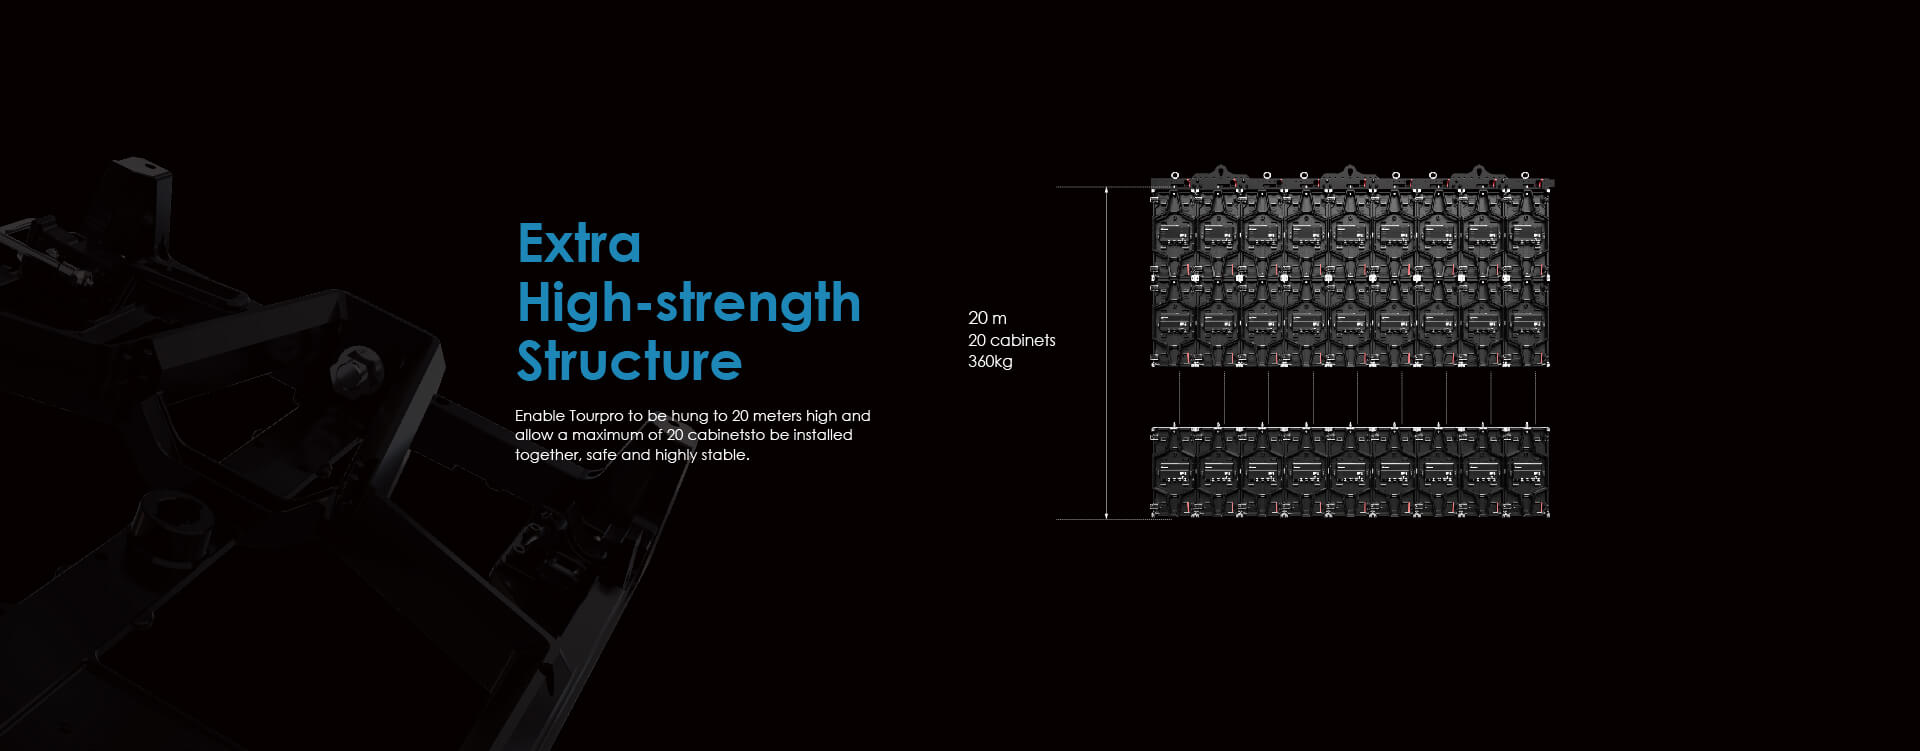 extra high-strength structure, led display